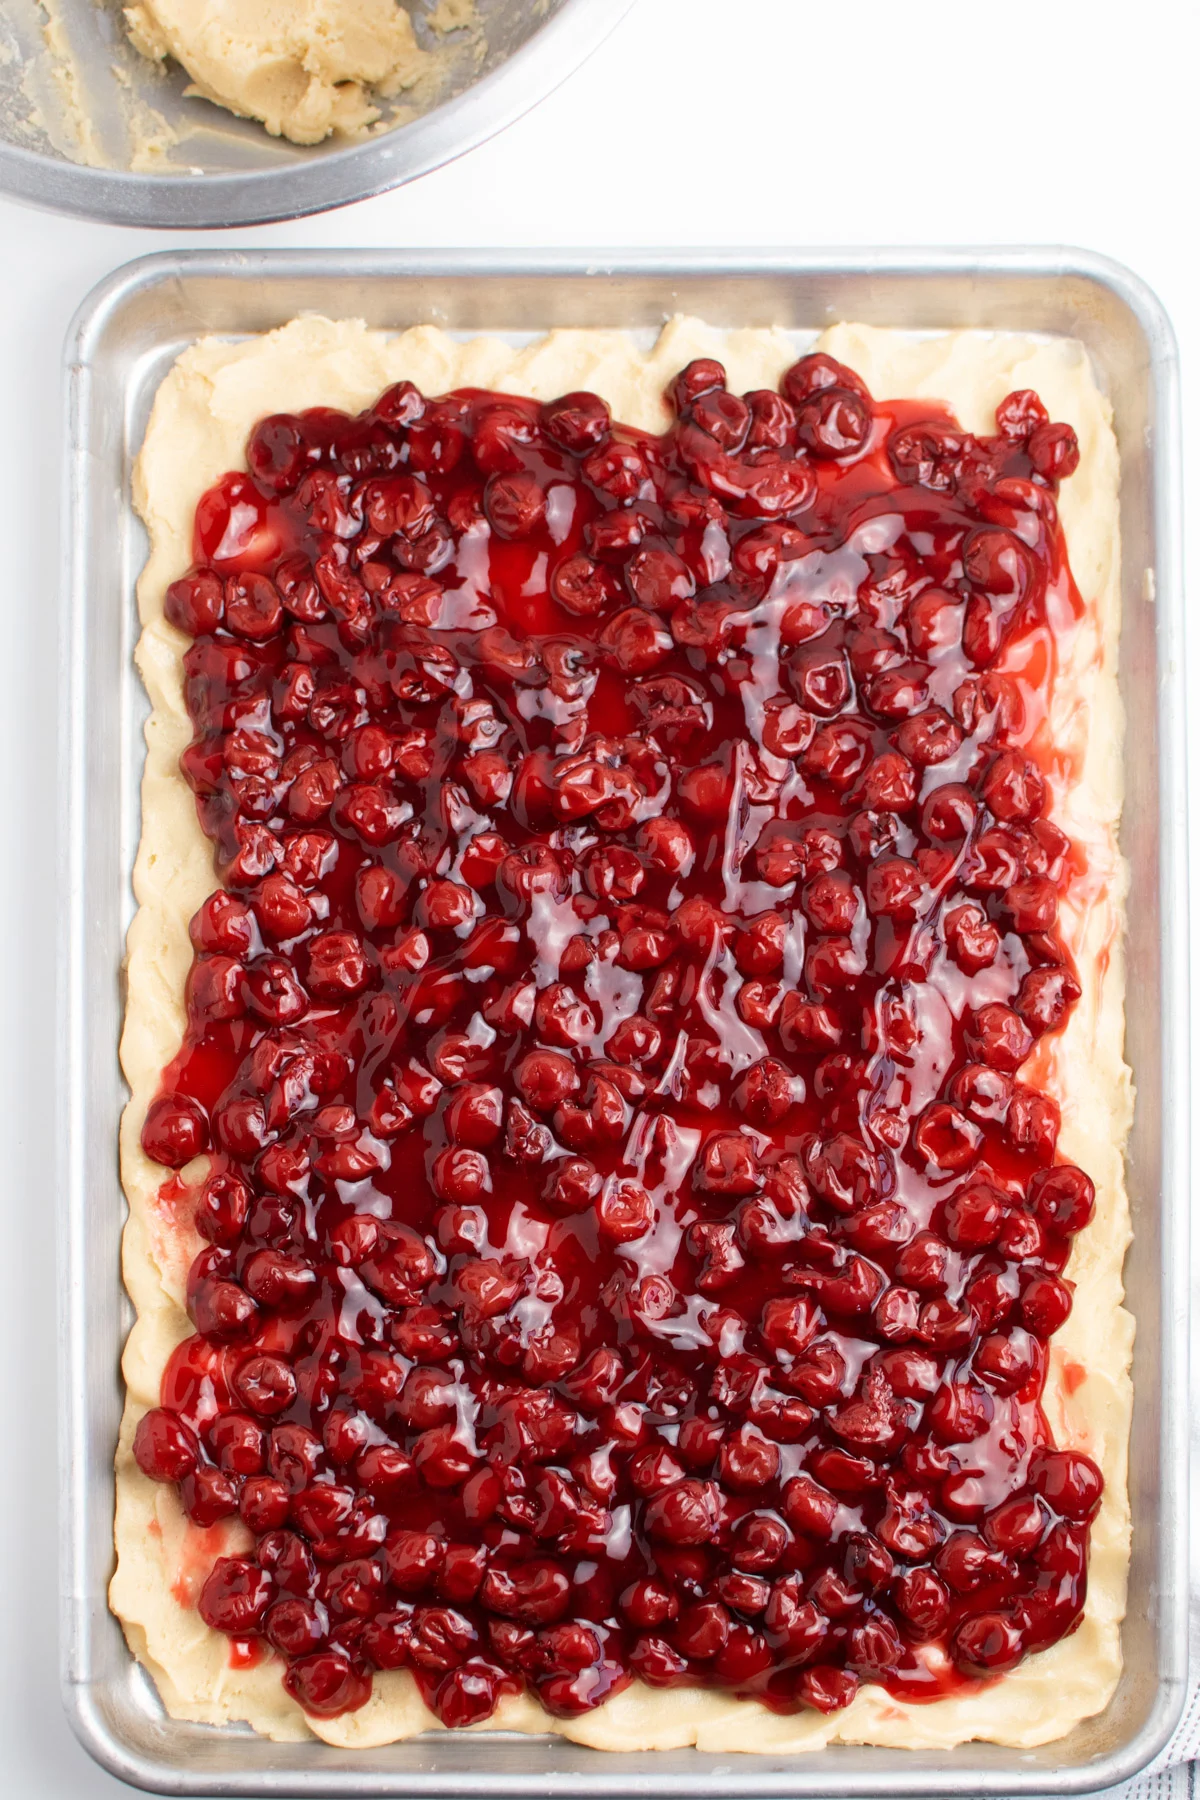 Cherry pie filling spread over shortbread crust on large metal baking sheet.